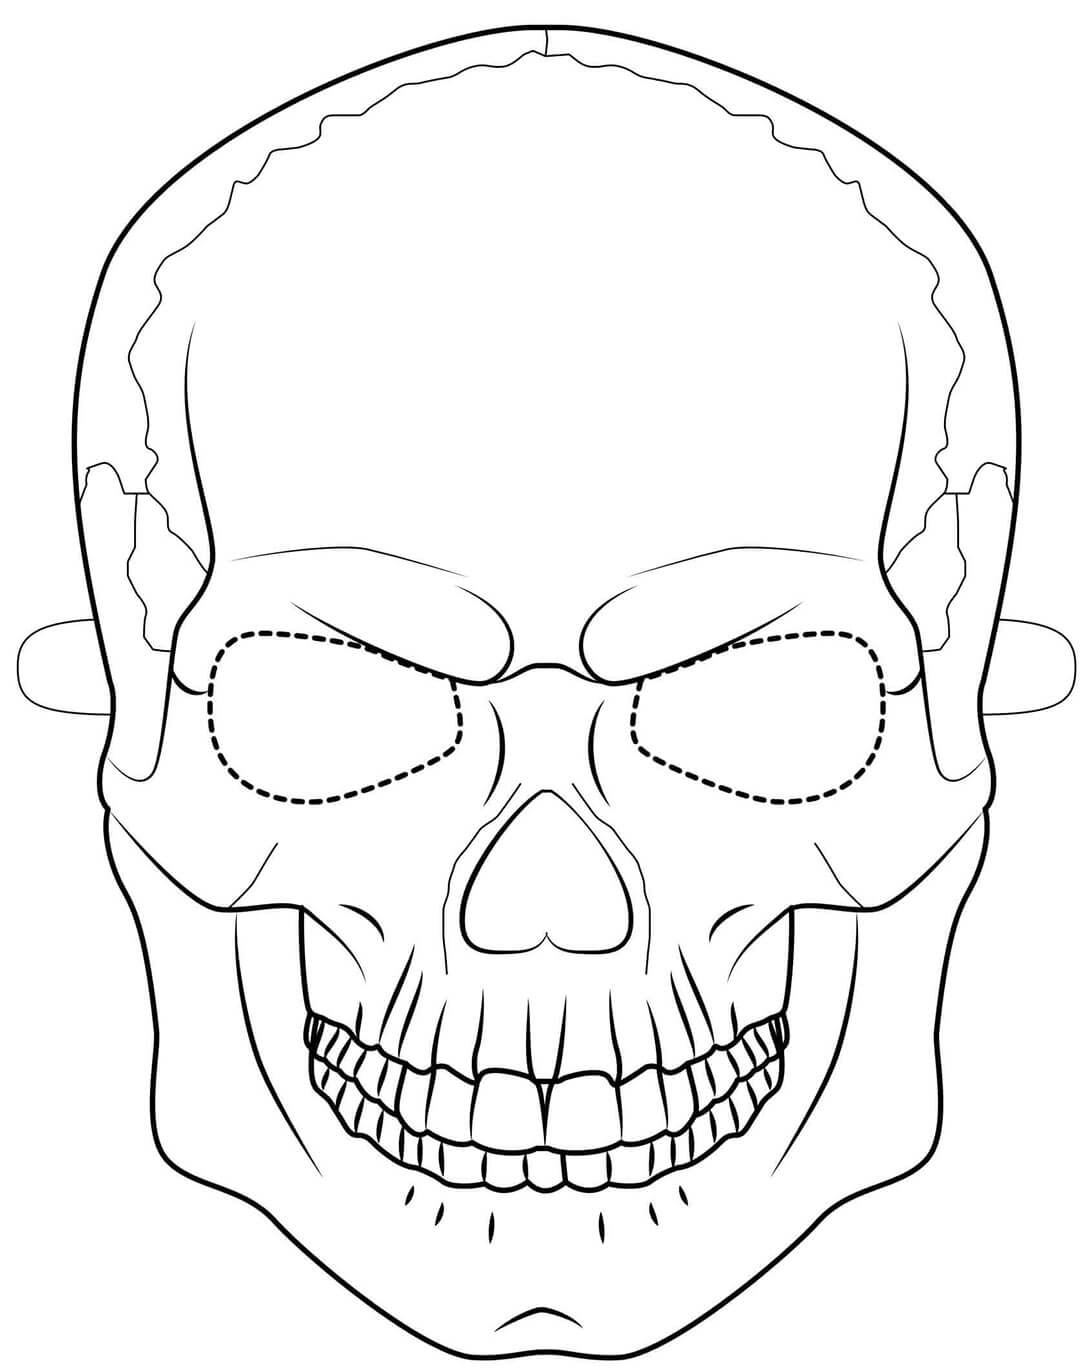 Halloween Skull Mask Coloring Page - Free Printable Coloring Pages for Kids